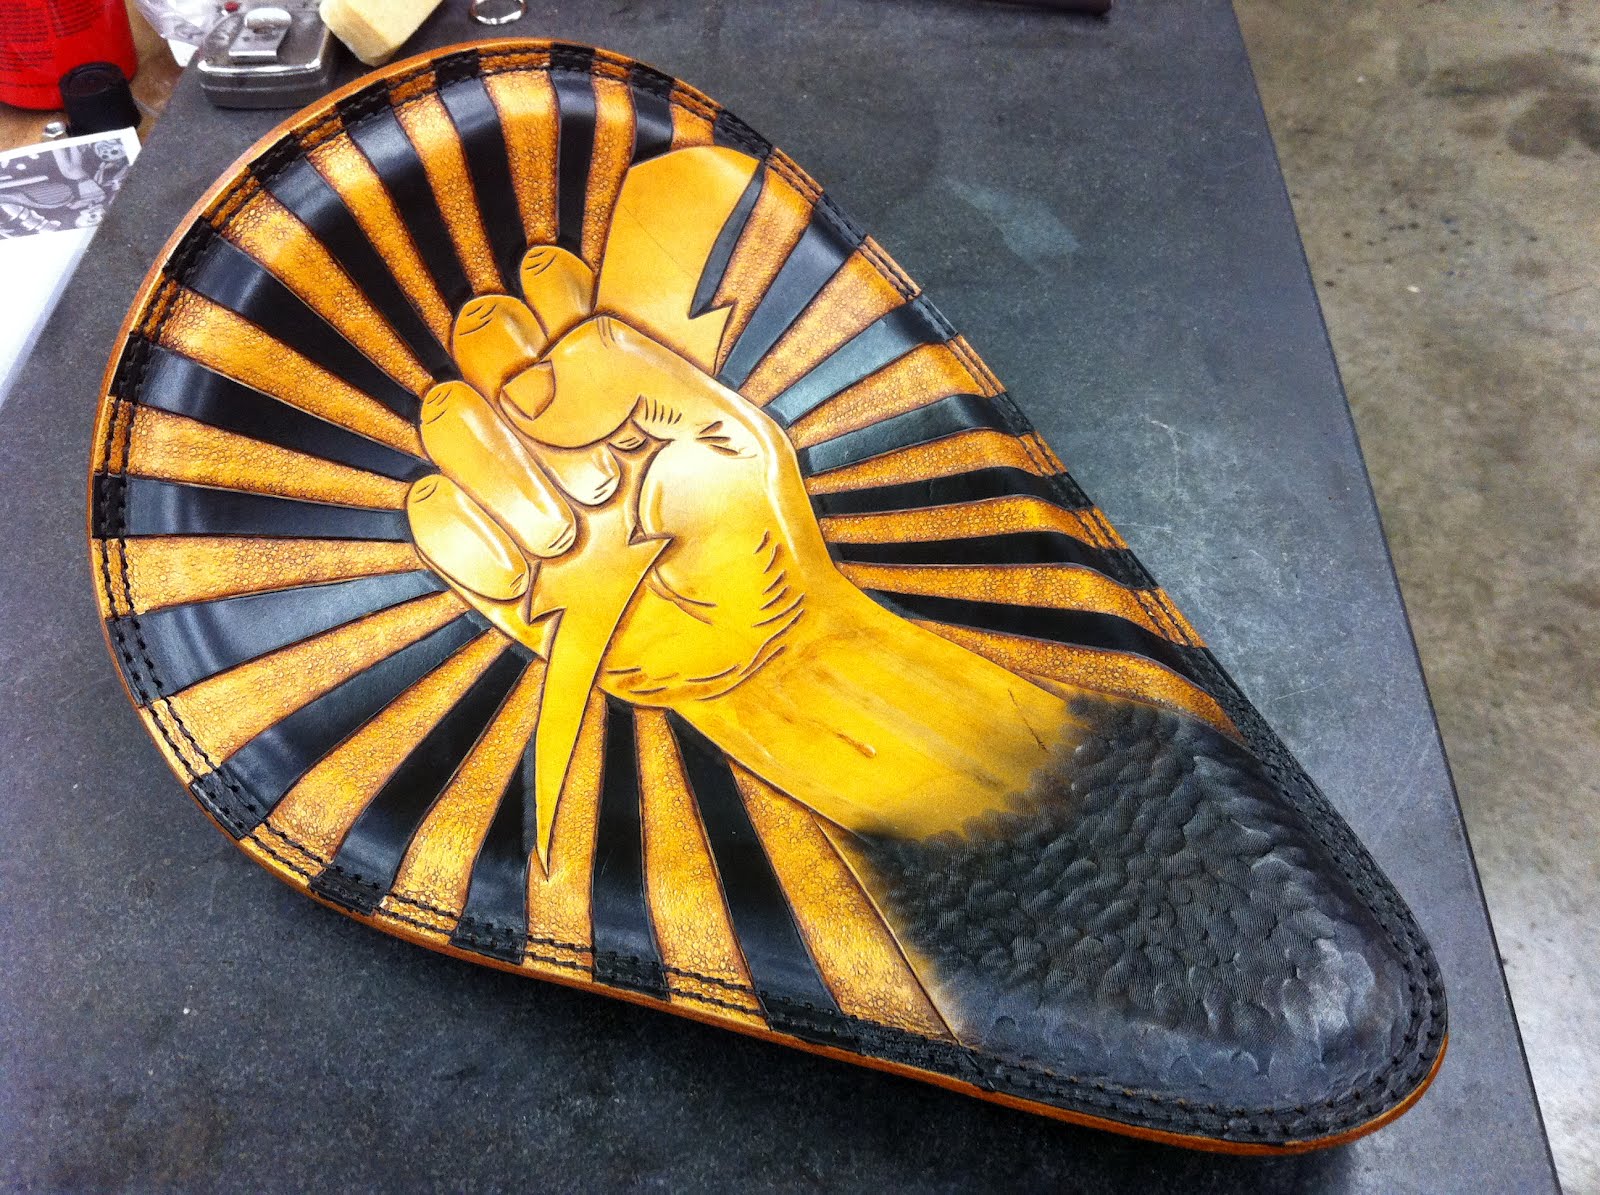 Anvil Customs: NEW Anvil Customs WEBSITE coming VERY soon! More wallets, chopper seats, leather ...